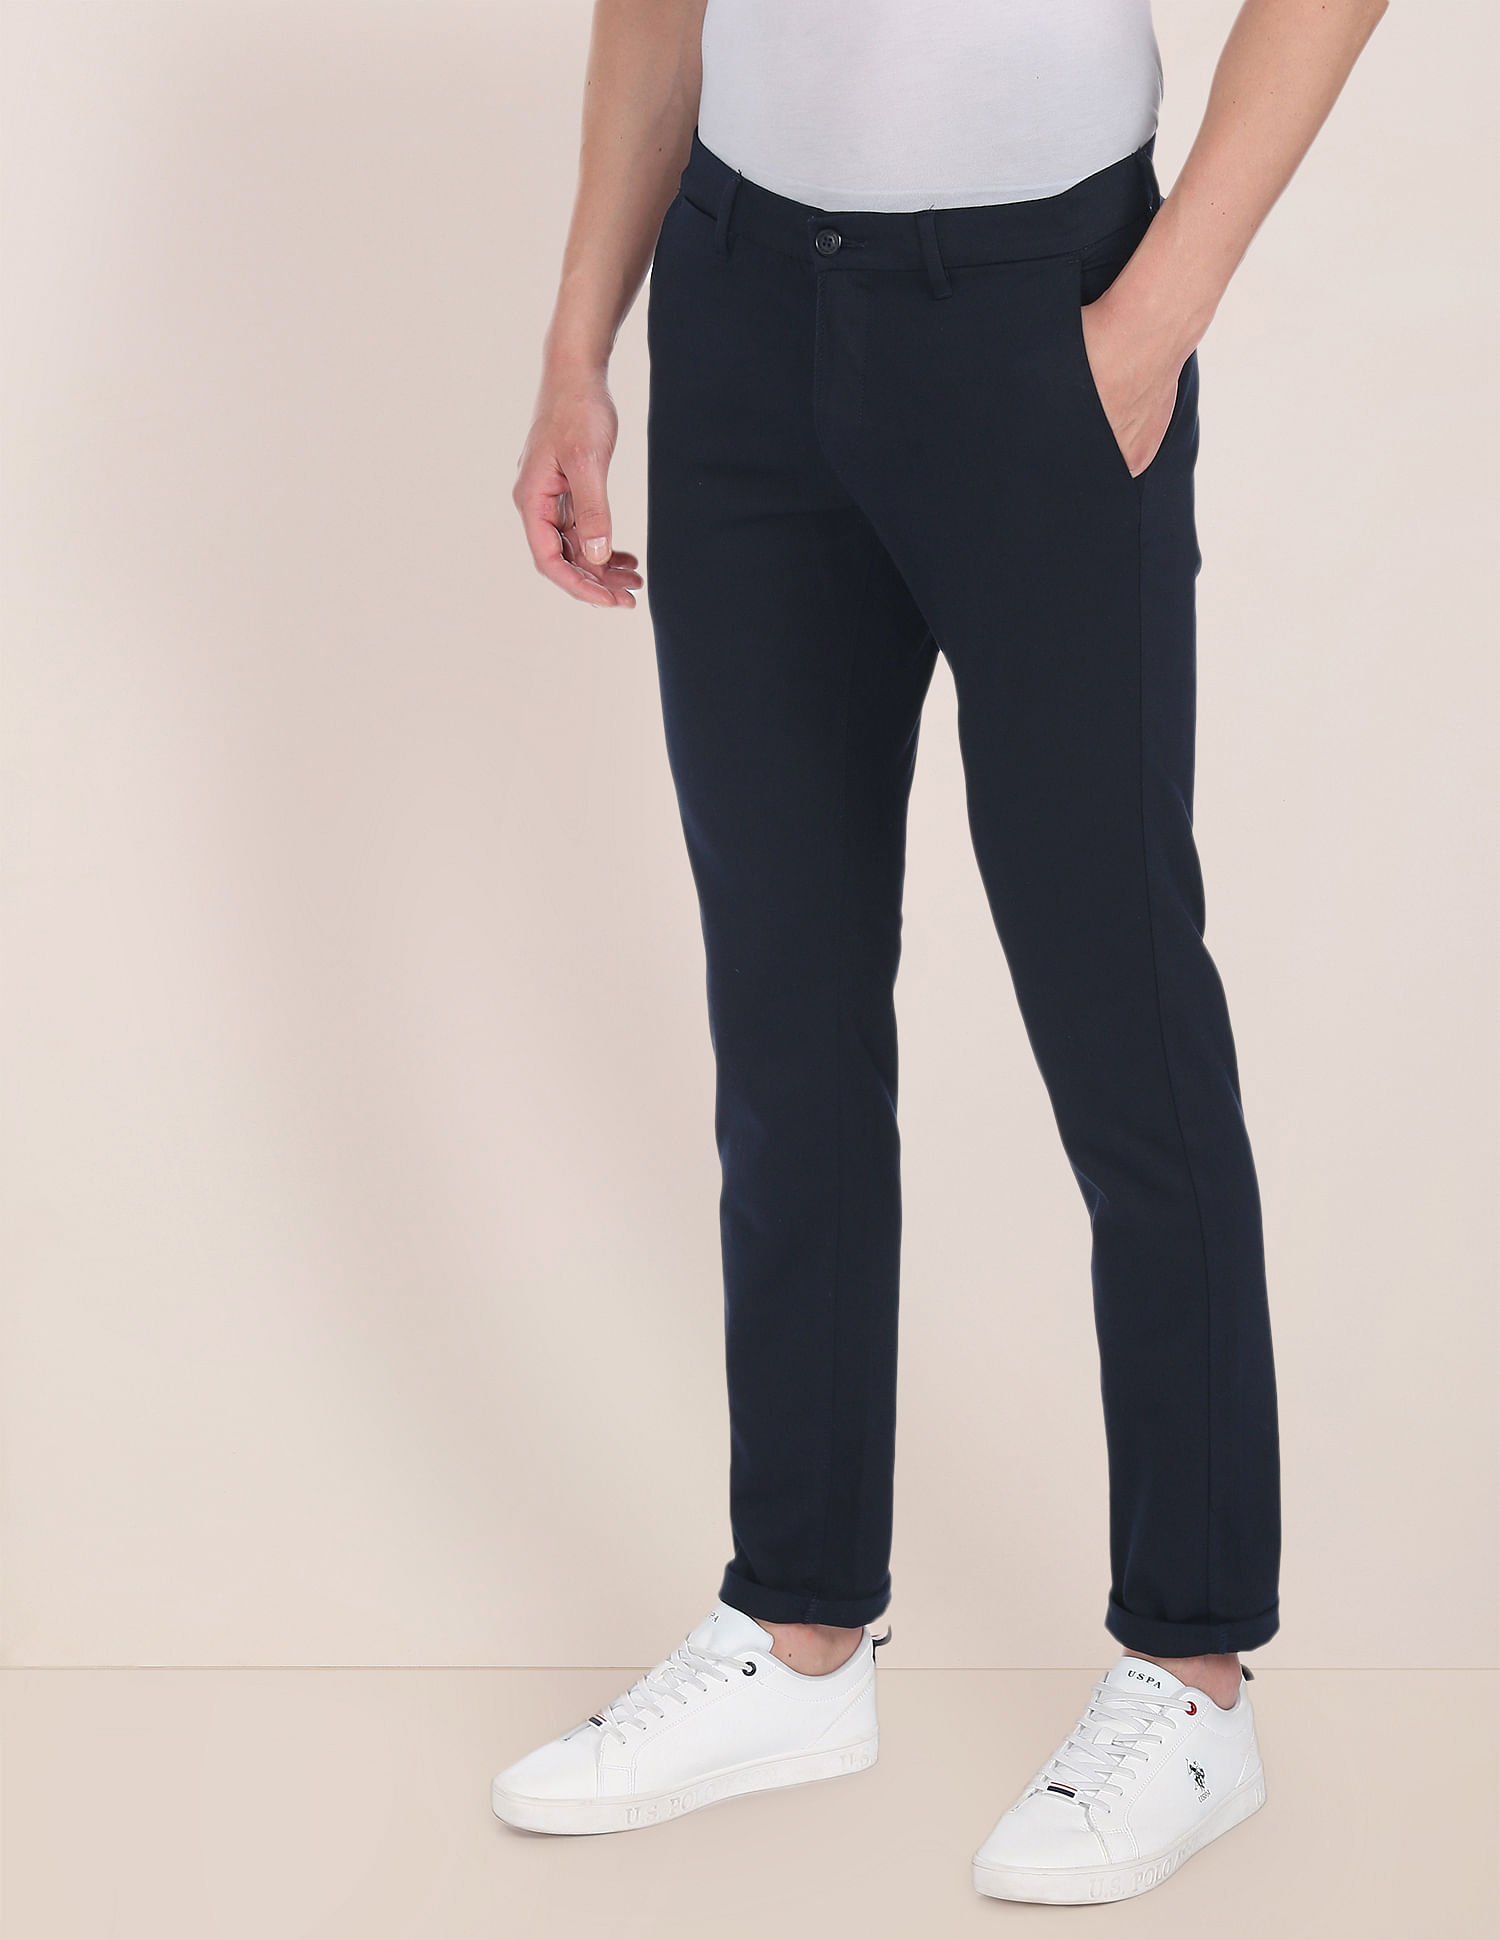 Buy USPA Tailored Men Black Slim Fit Solid Formal Trousers - NNNOW.com